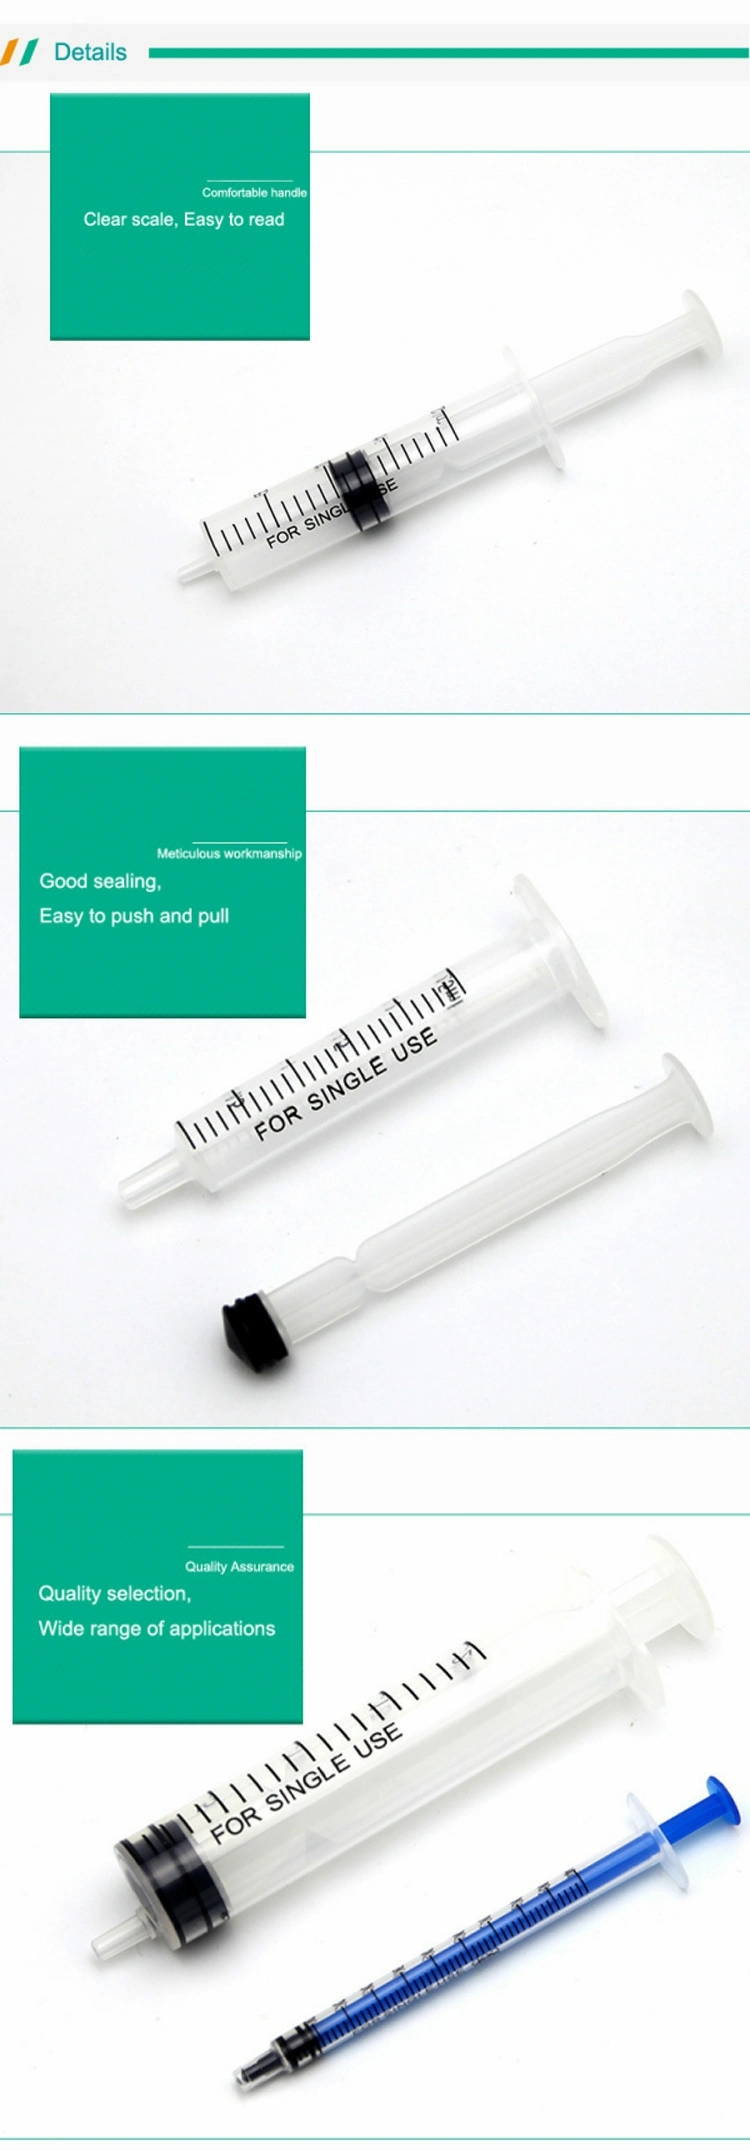 Factory Price Sterile Disposable Medical Syringes with Needles Manufacturer